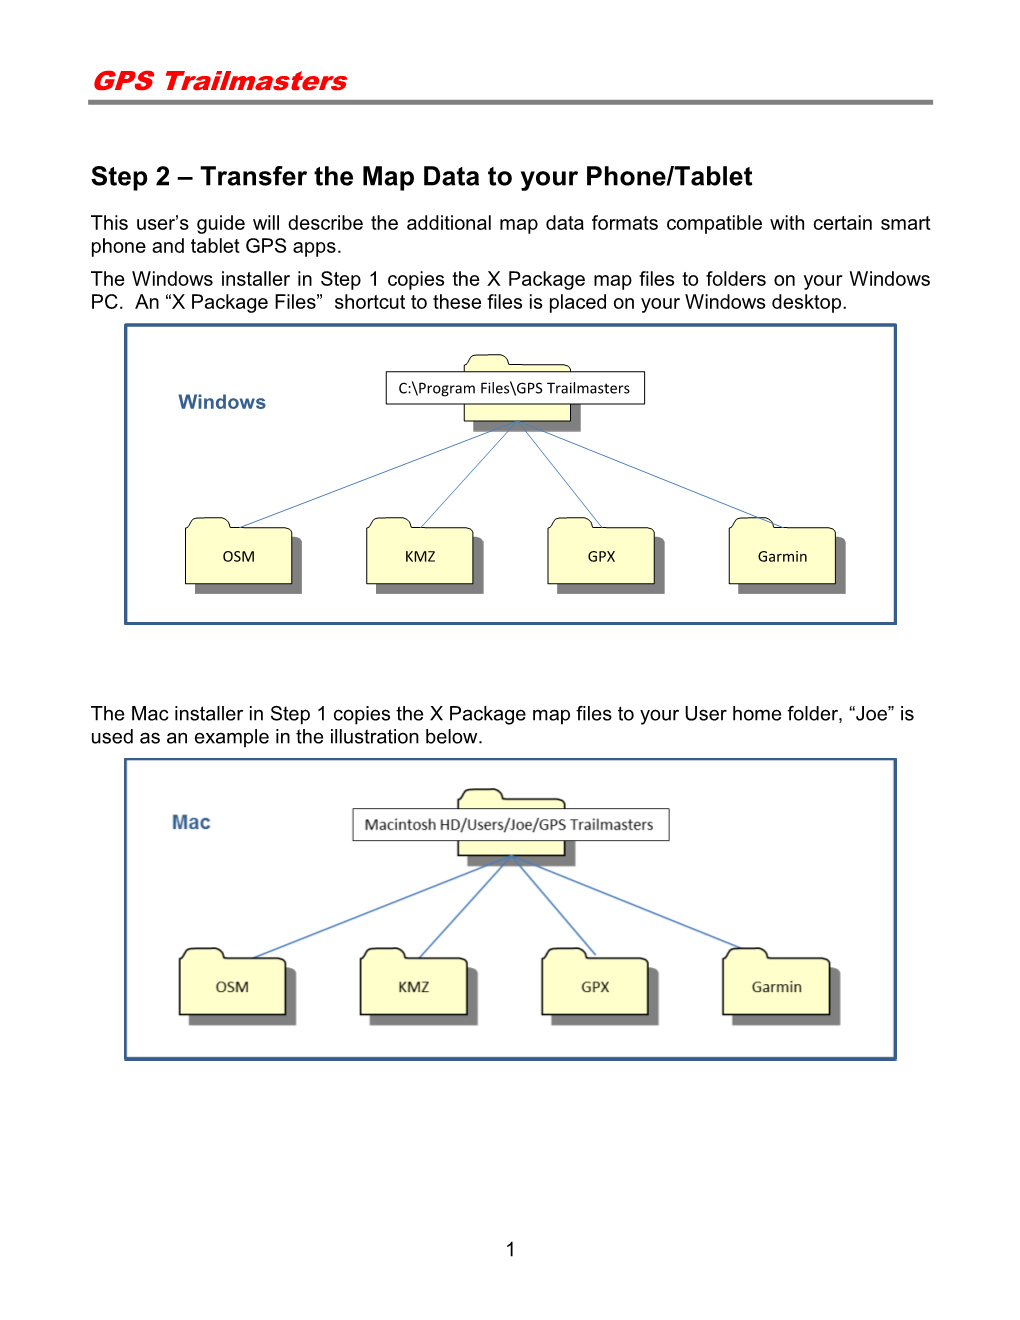 Step 2 – Transfer the Map Data to Your Phone/Tablet